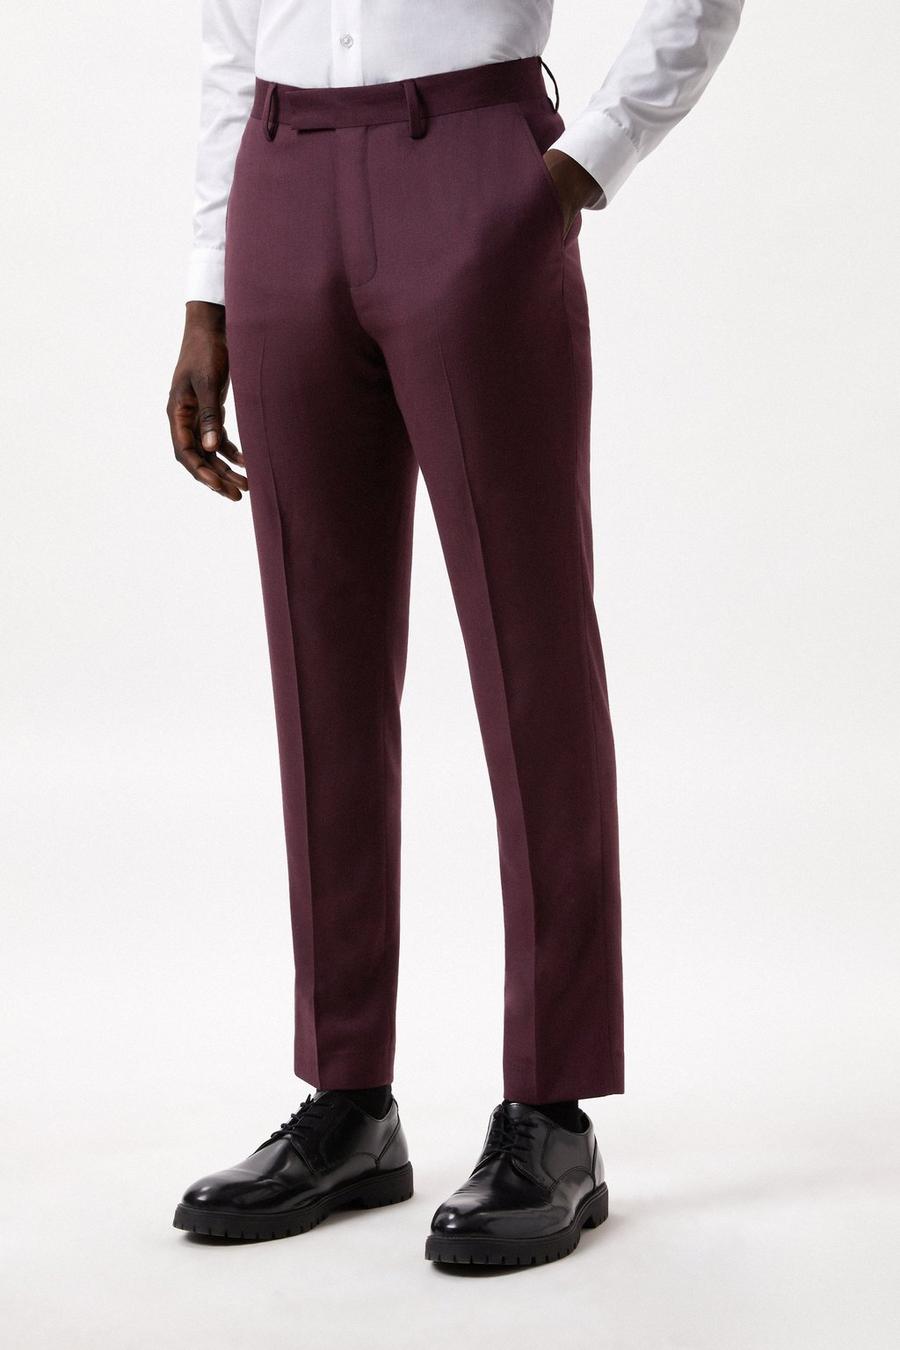 Slim Fit Burgundy Micro Texture Two-Piece Suit